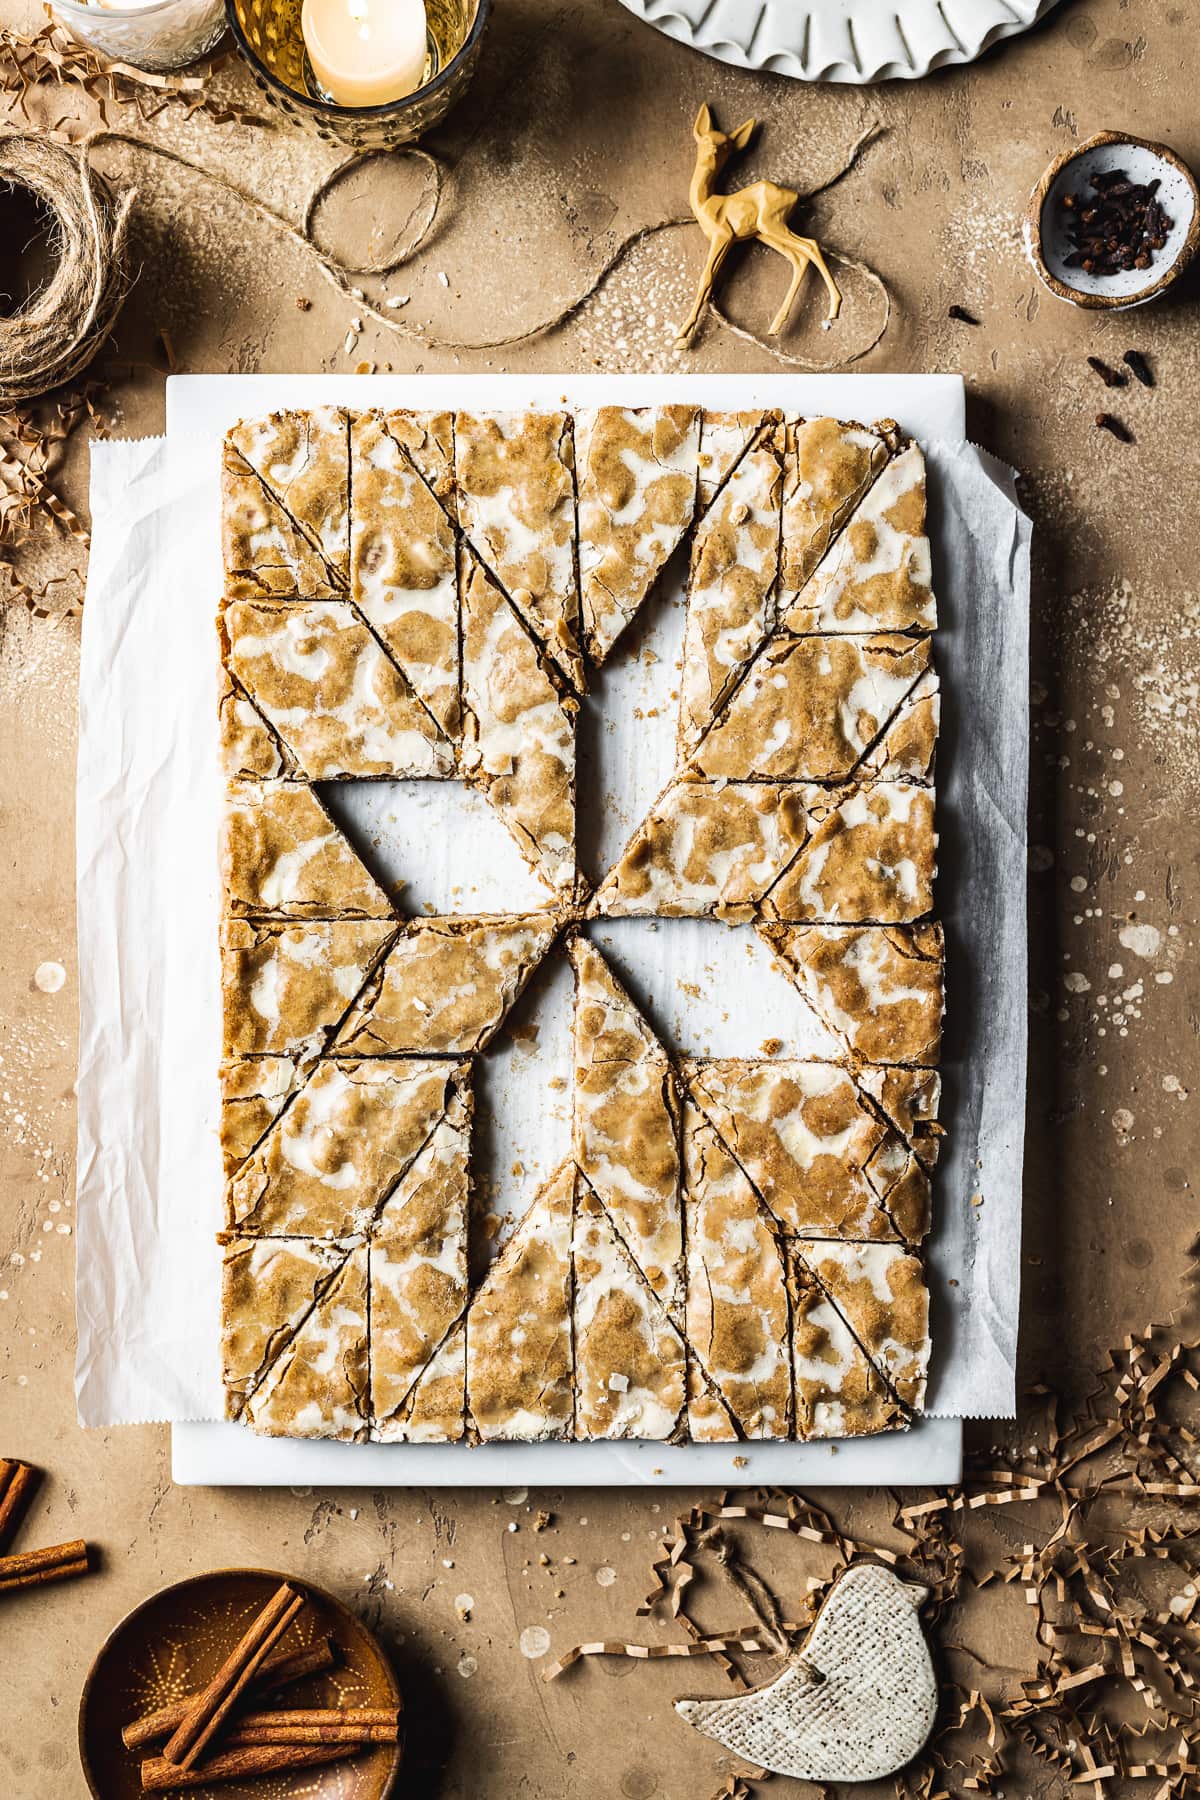 Bar cookies on a marble block and white parchment paper, cut into a decorative holiday star pattern. Four of the cookies in the middle have been removed, revealing the white parchment paper below. The marble block rests on a tan stone surface and is surrounded by cinnamon sticks, cloves, a votive candle, brown twine, holiday figurines and more cookies.